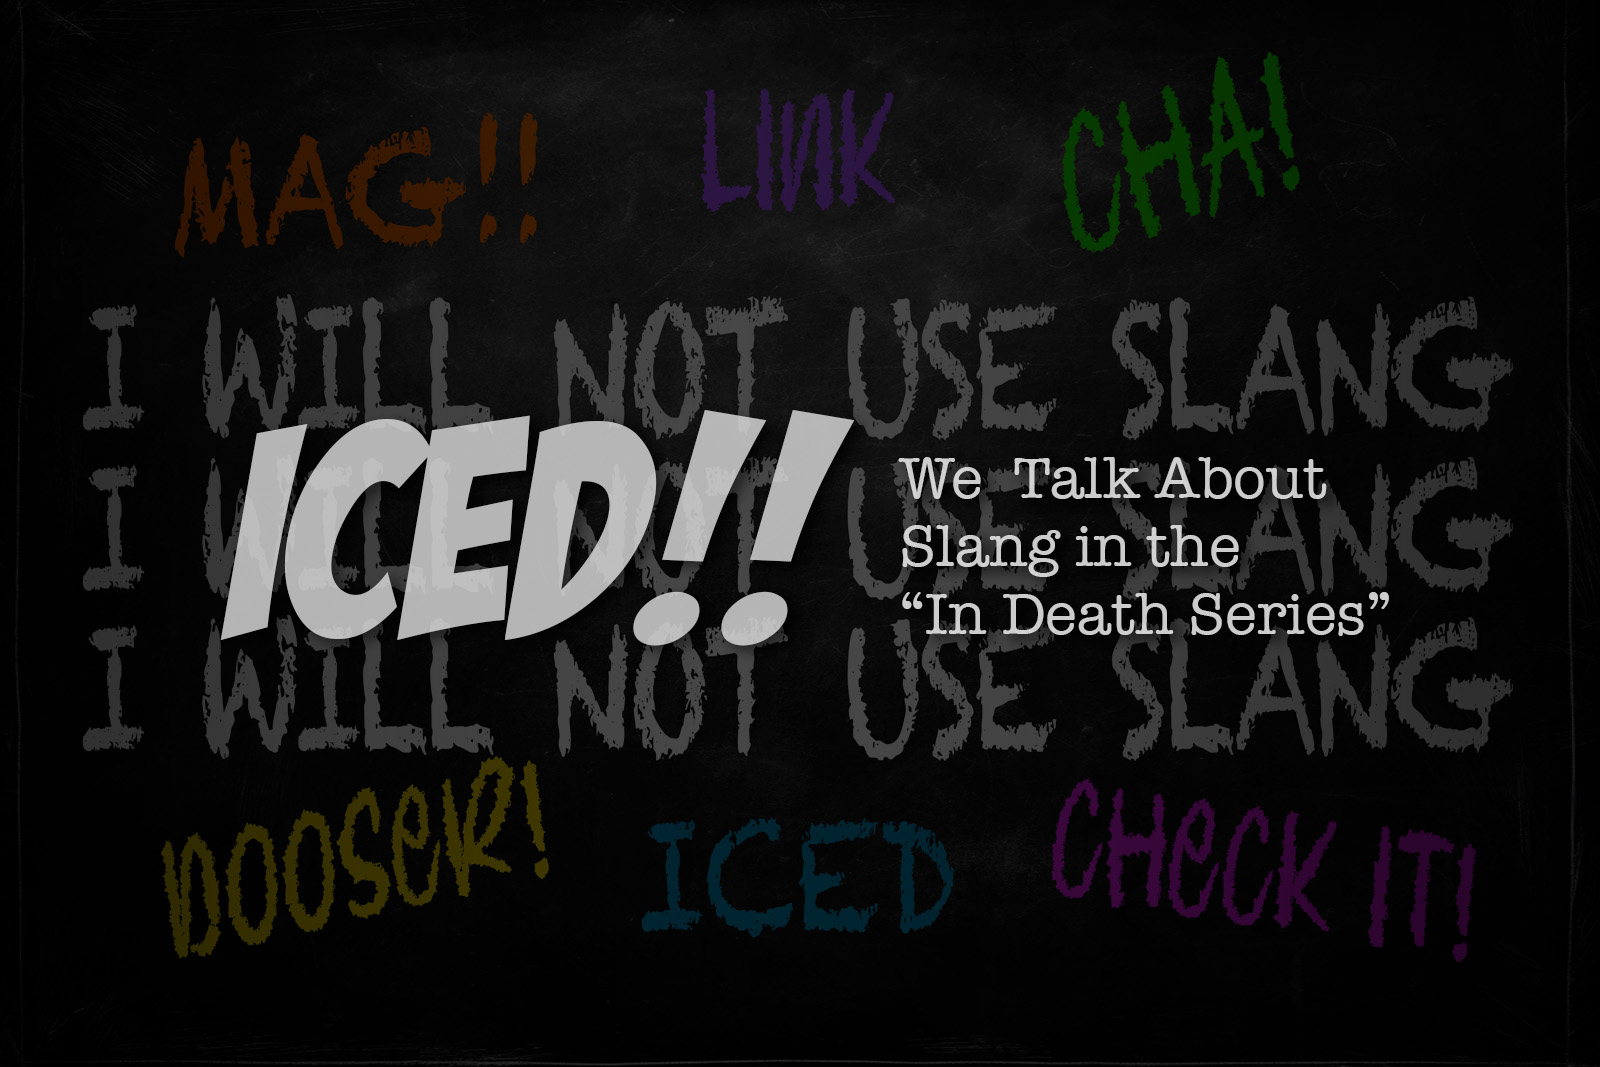 Iced!! “In Death” Slang Words